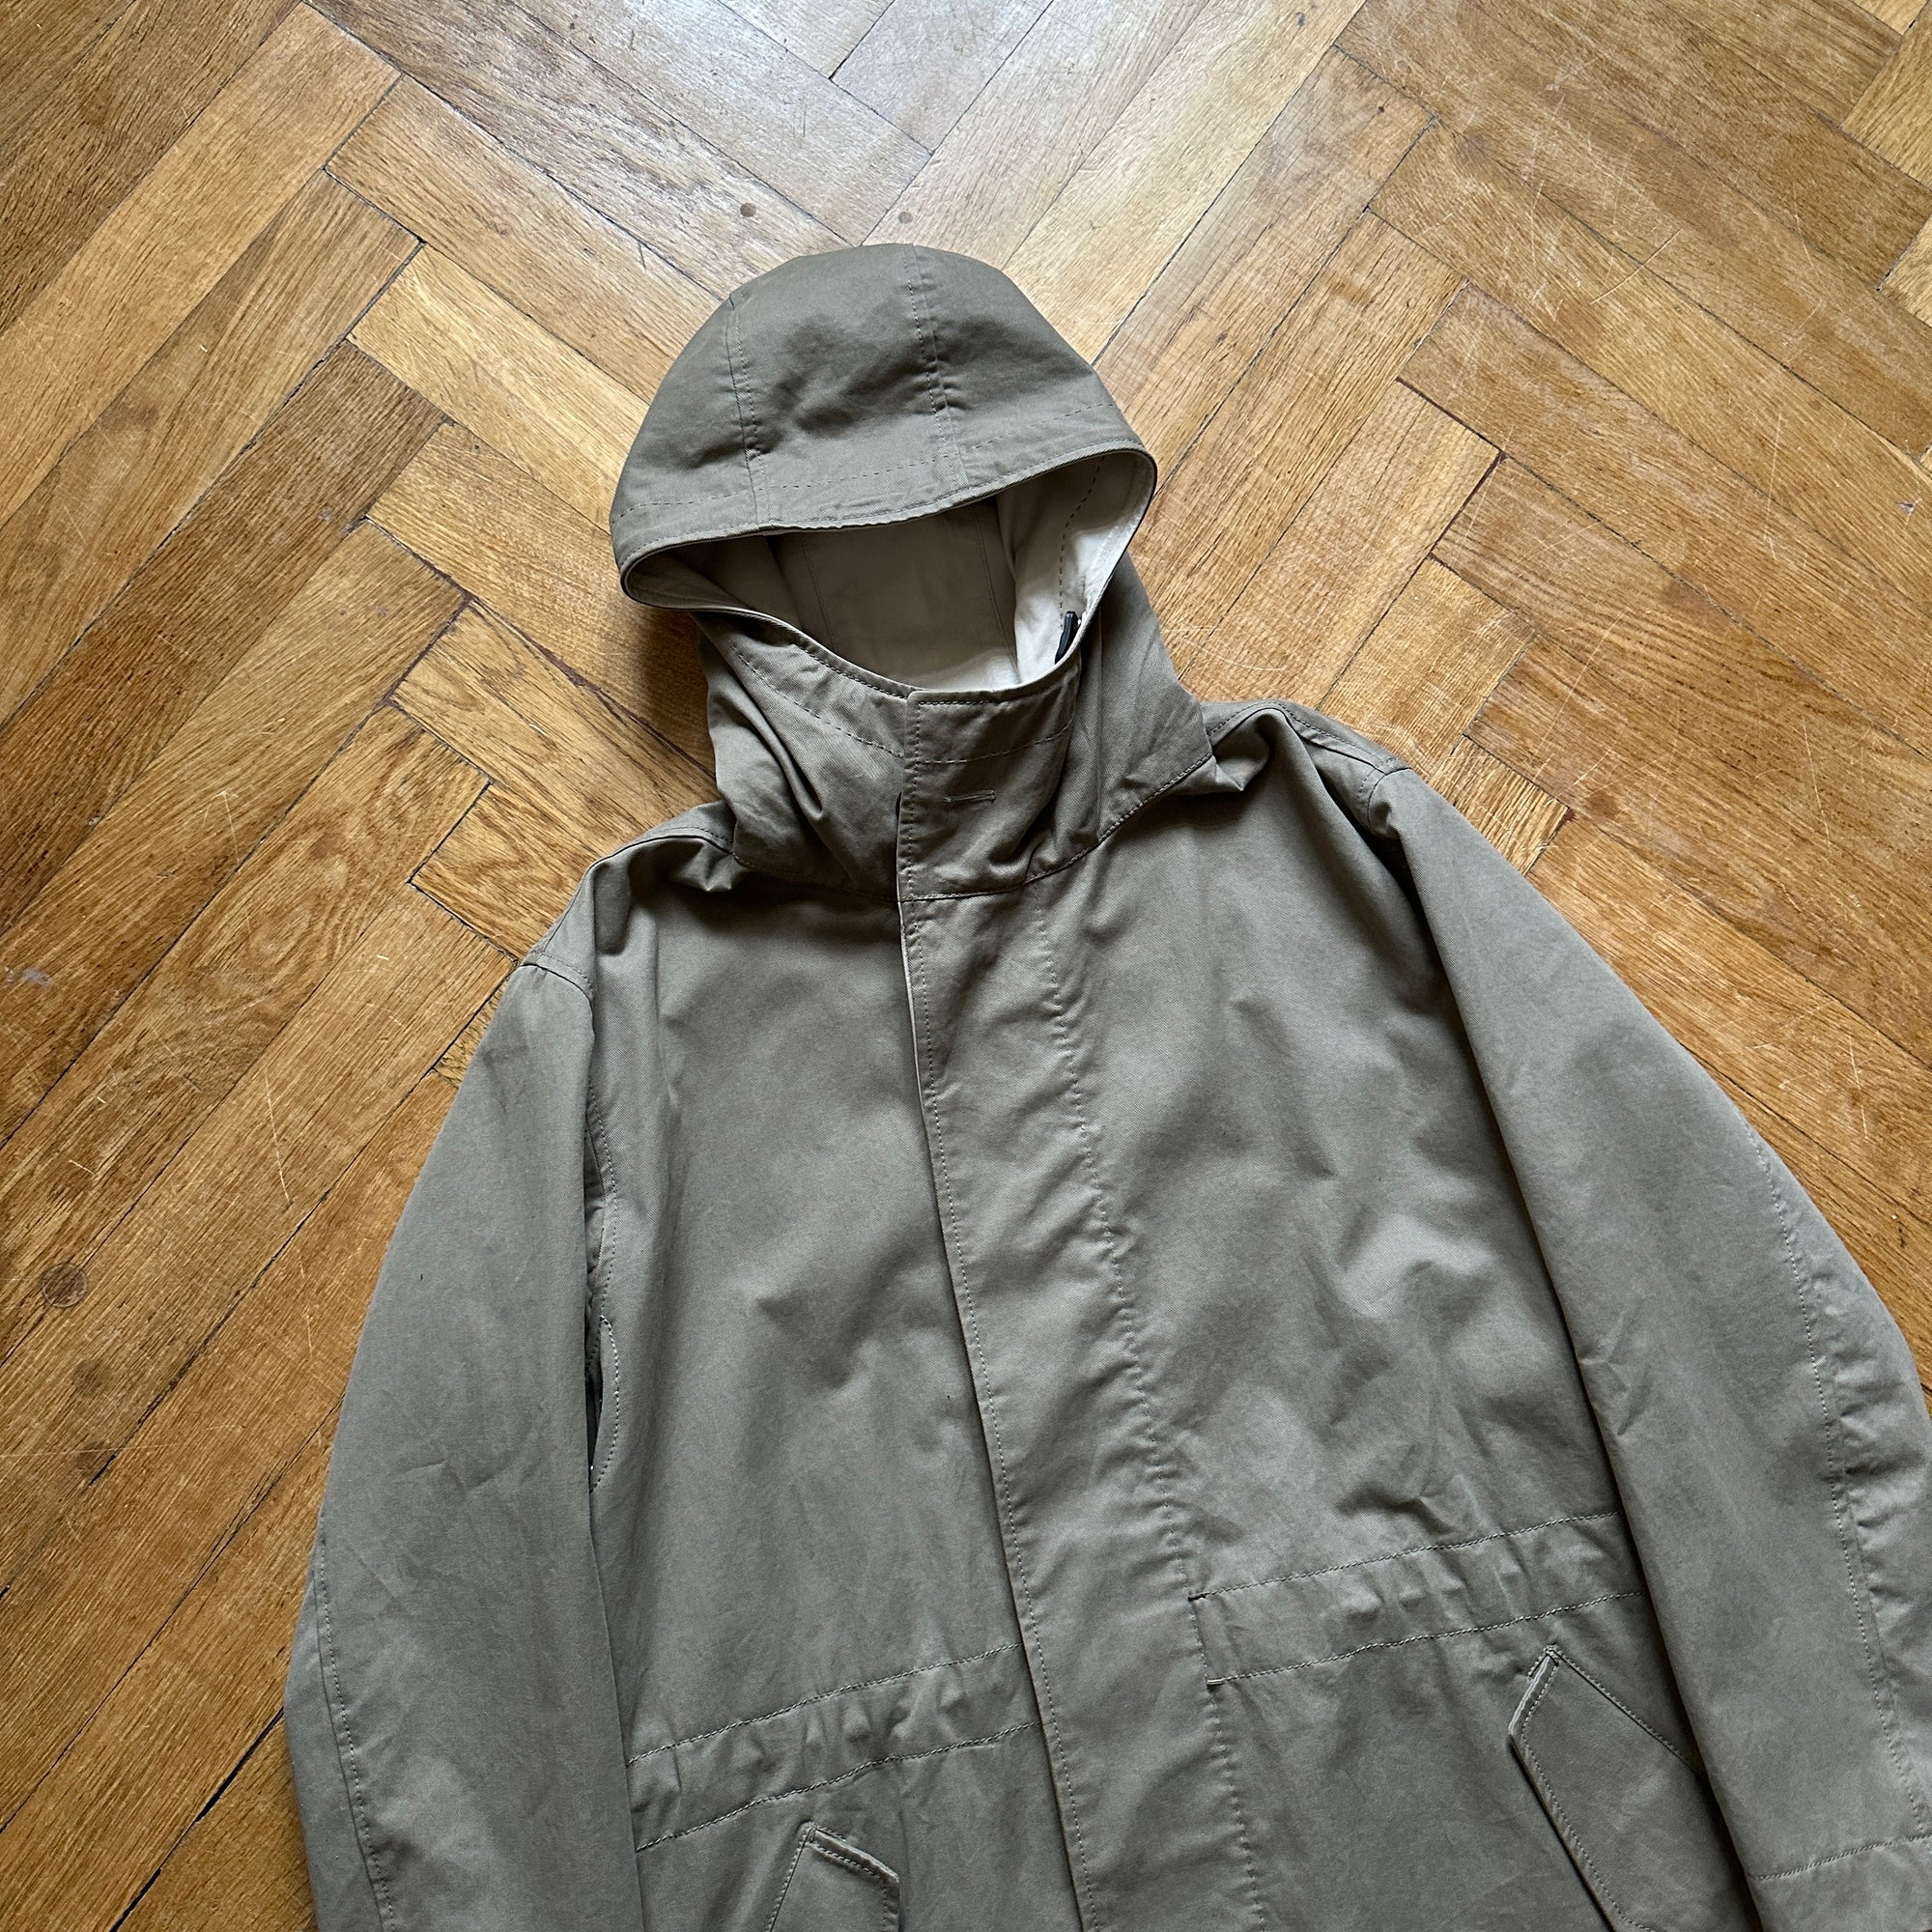 Berluti by Haider Ackermann SS18 Leather Lined Parka Sample